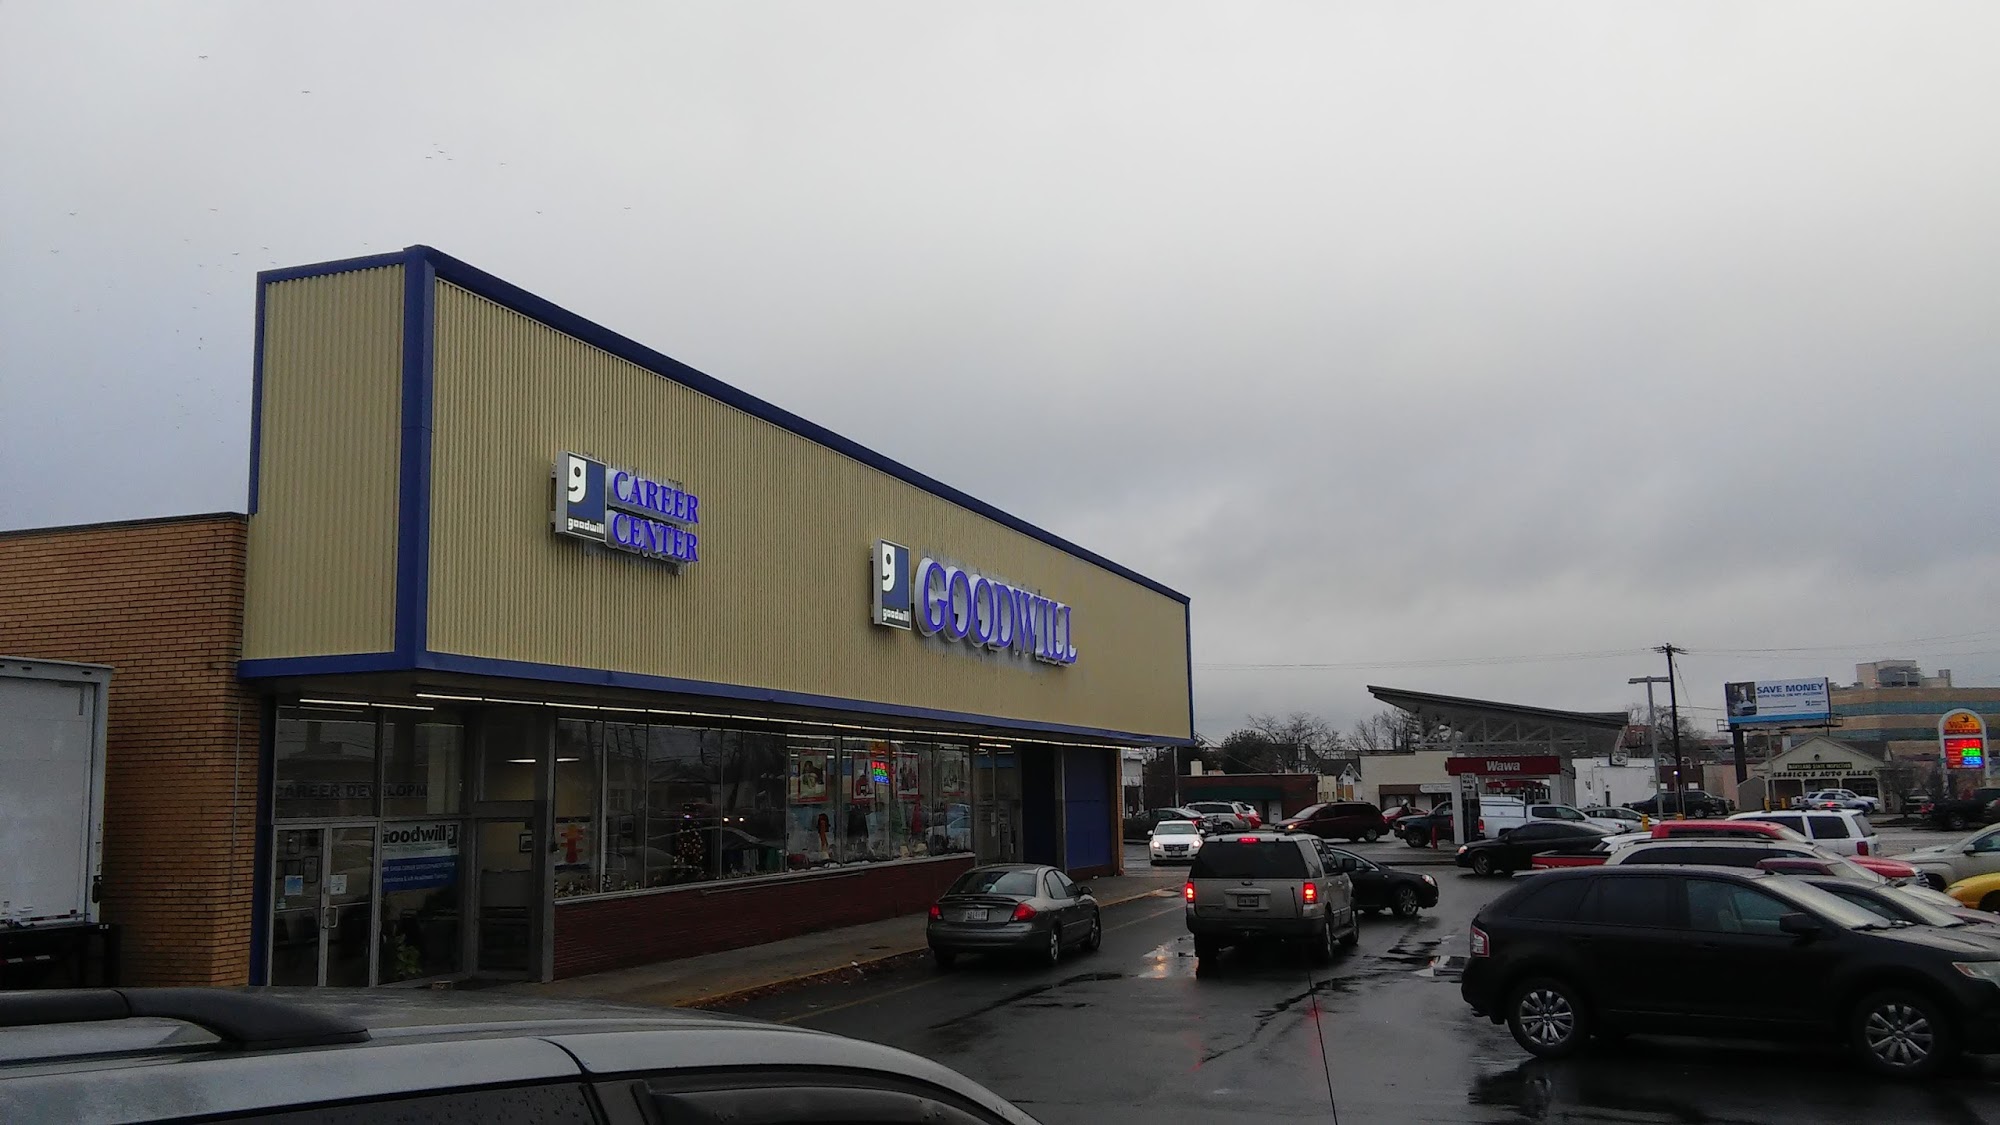 Goodwill Retail Store and Donation Center